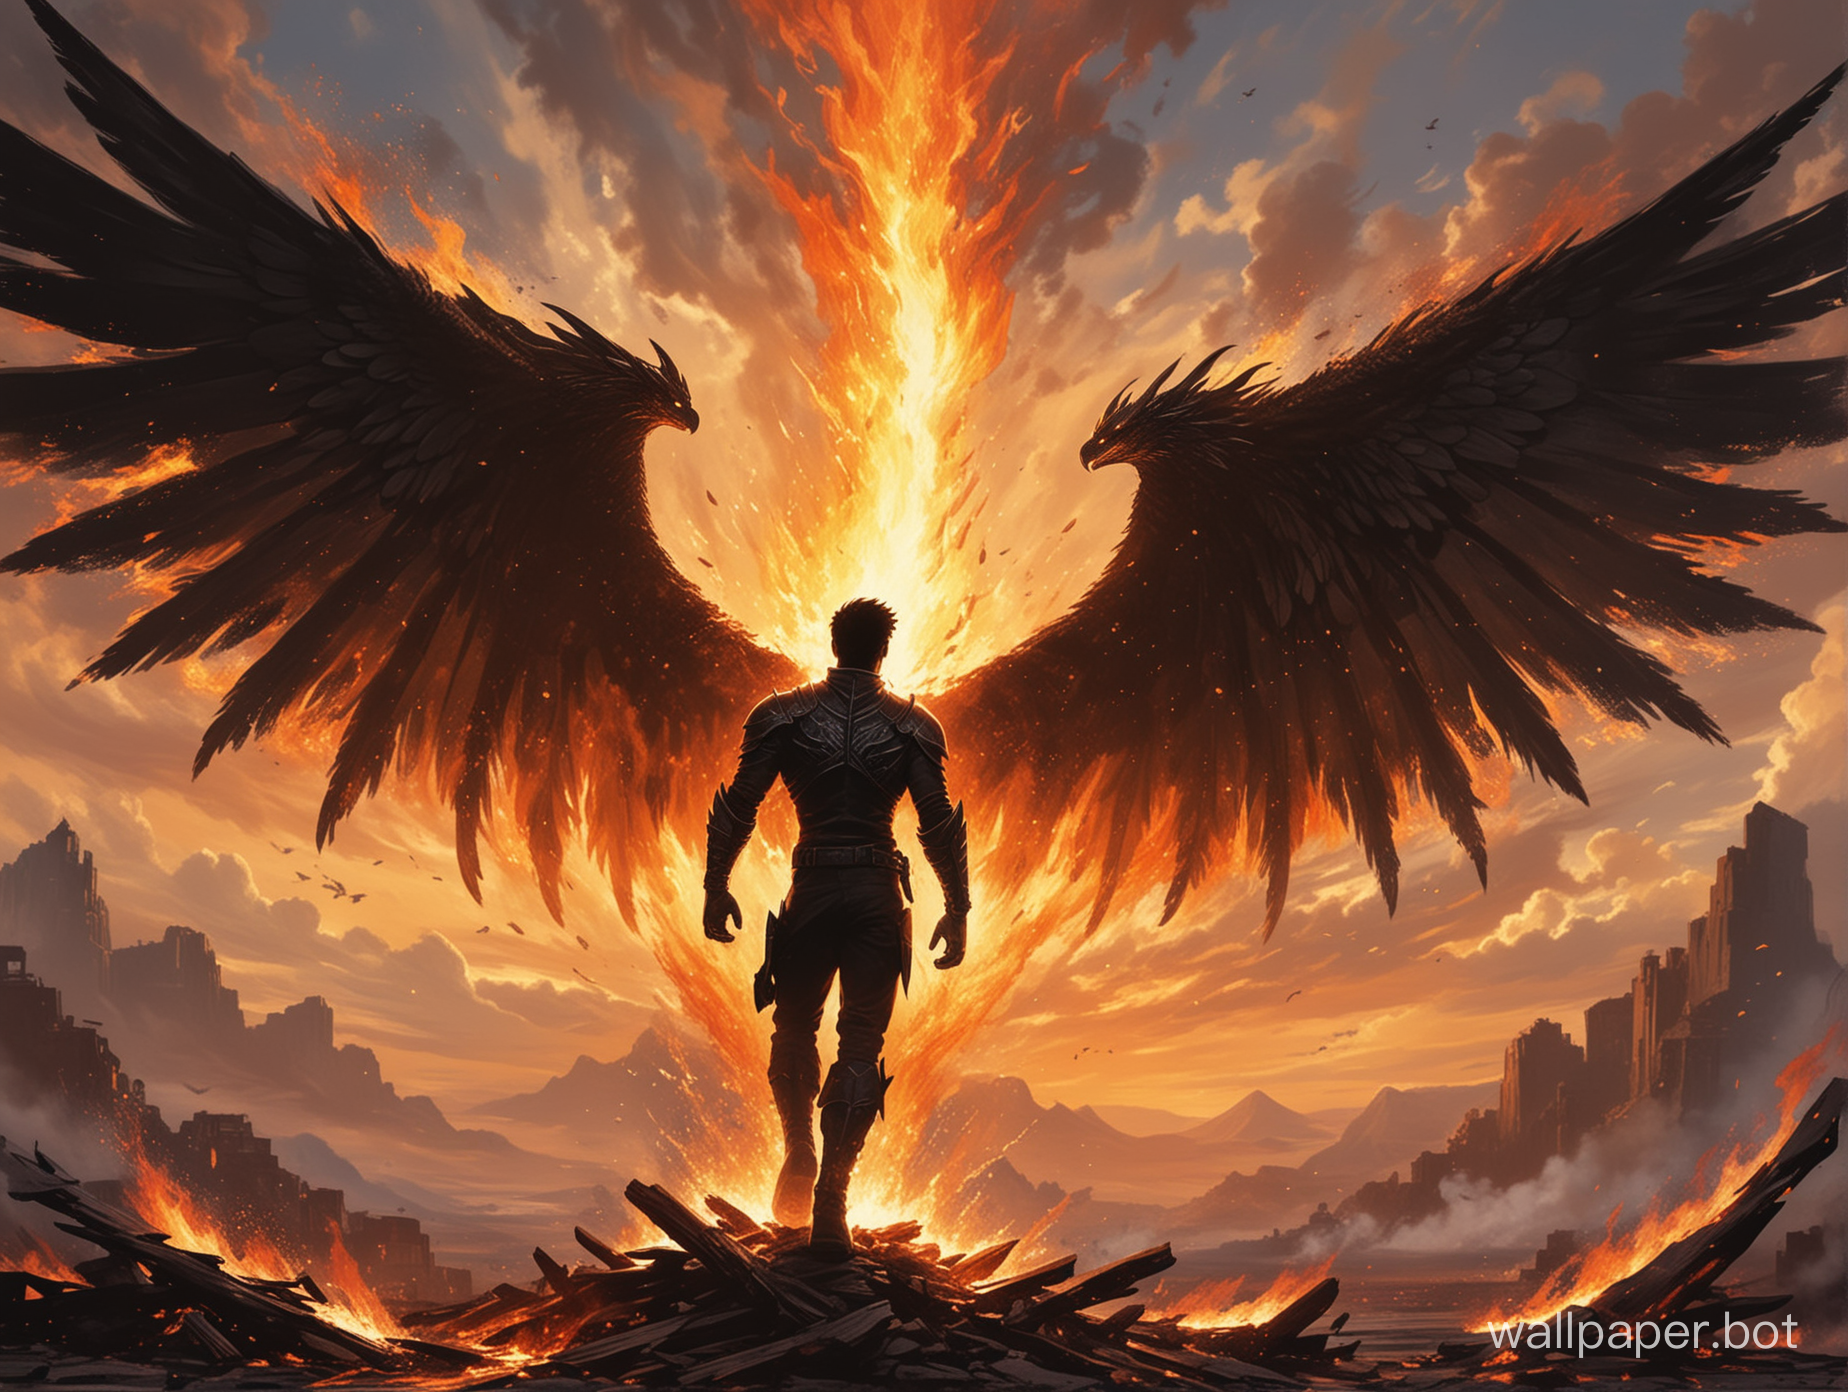 a person like a black shadow like appearance character with wings of fire rising from the ashes down around him to the sky